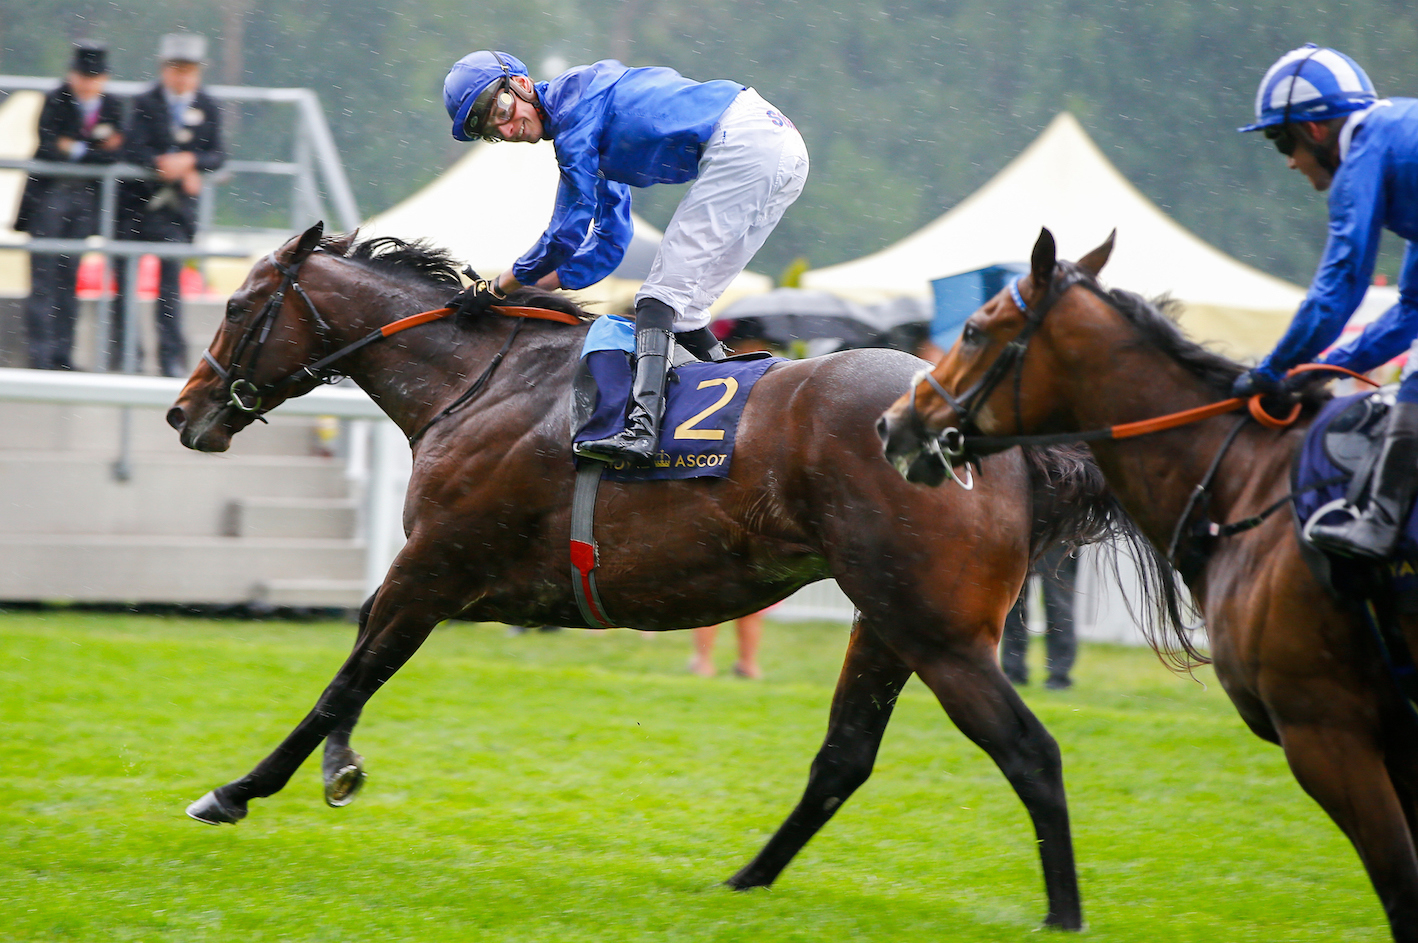 James Doyle winning the 2019 G1 King’s Stand Stakes at Royal Ascot for Godolphin on Blue Point: He has the versatility to win on the lead, from off a stalking pace, or from dead last, says his sister. Photo: Mark Cranham/focusonracing.com